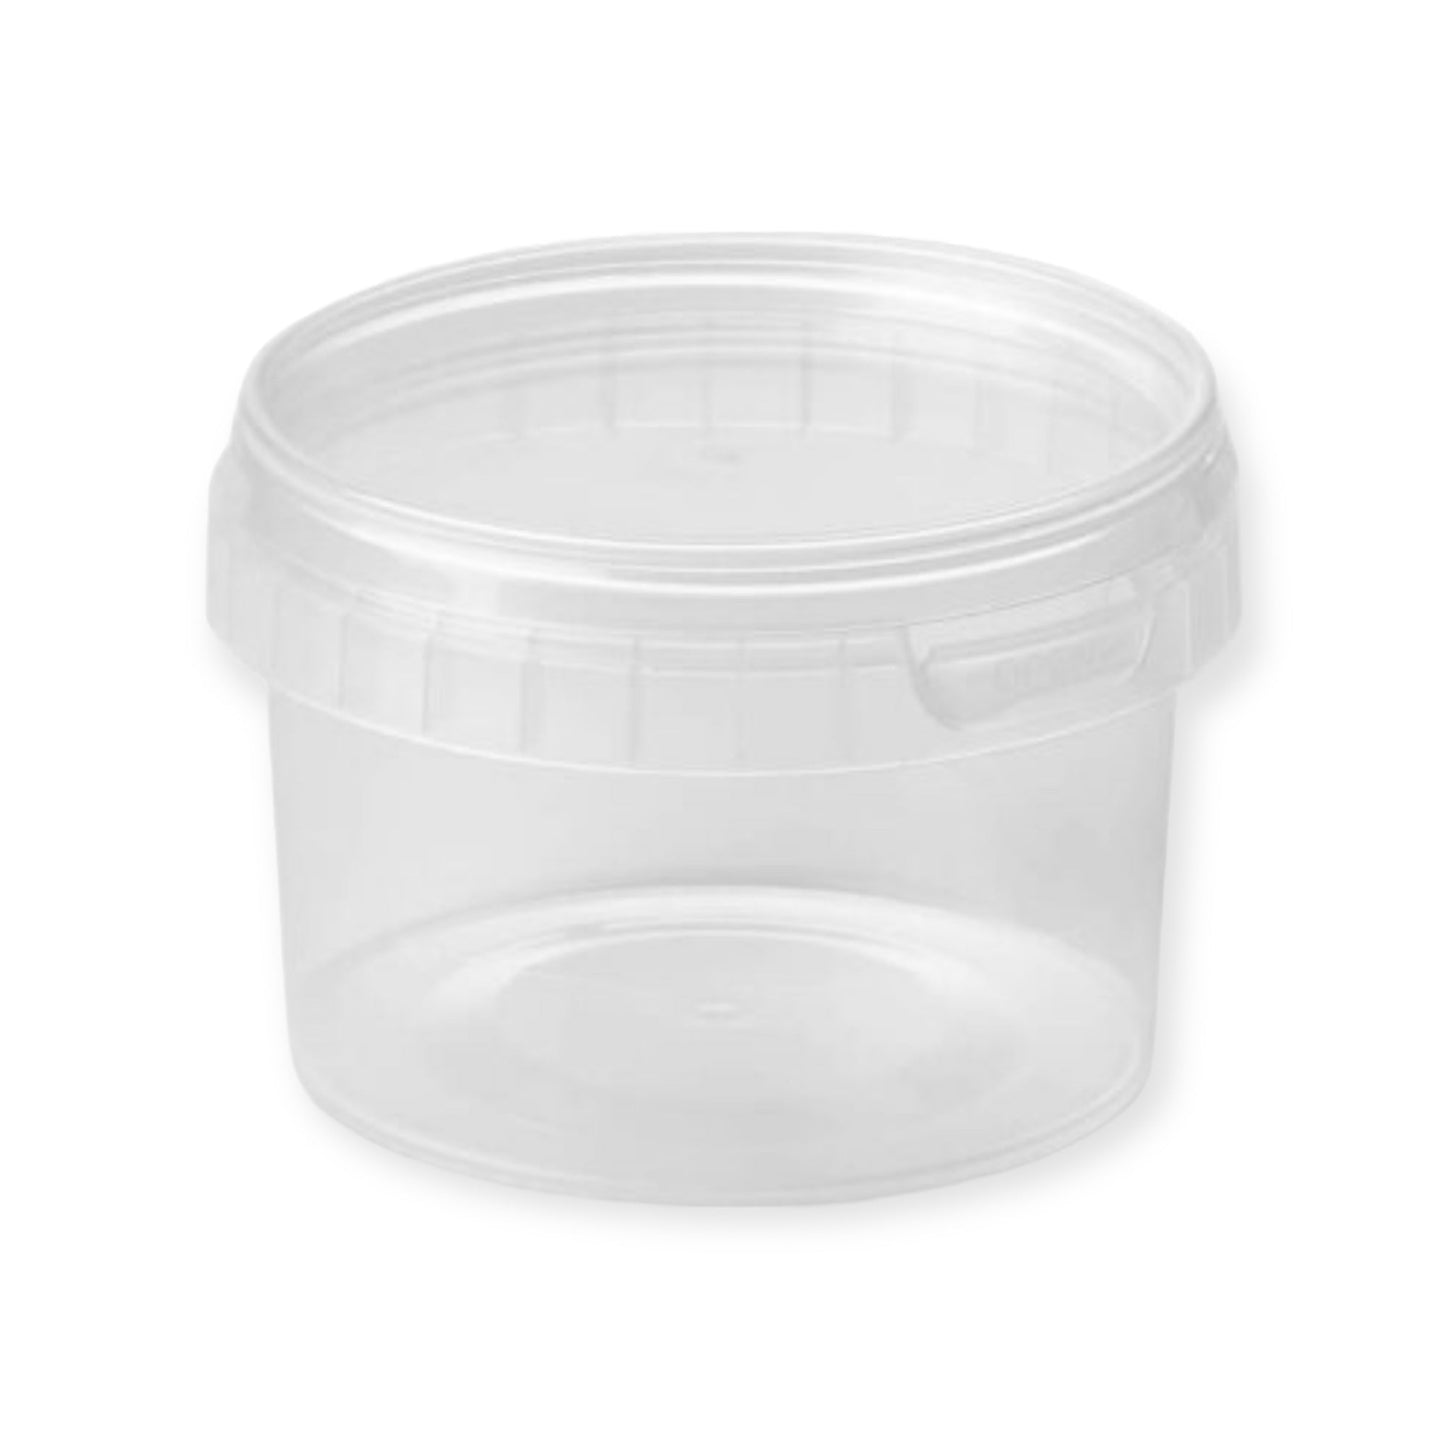 280ml Tamper-Proof Clear Round Containers & Lids